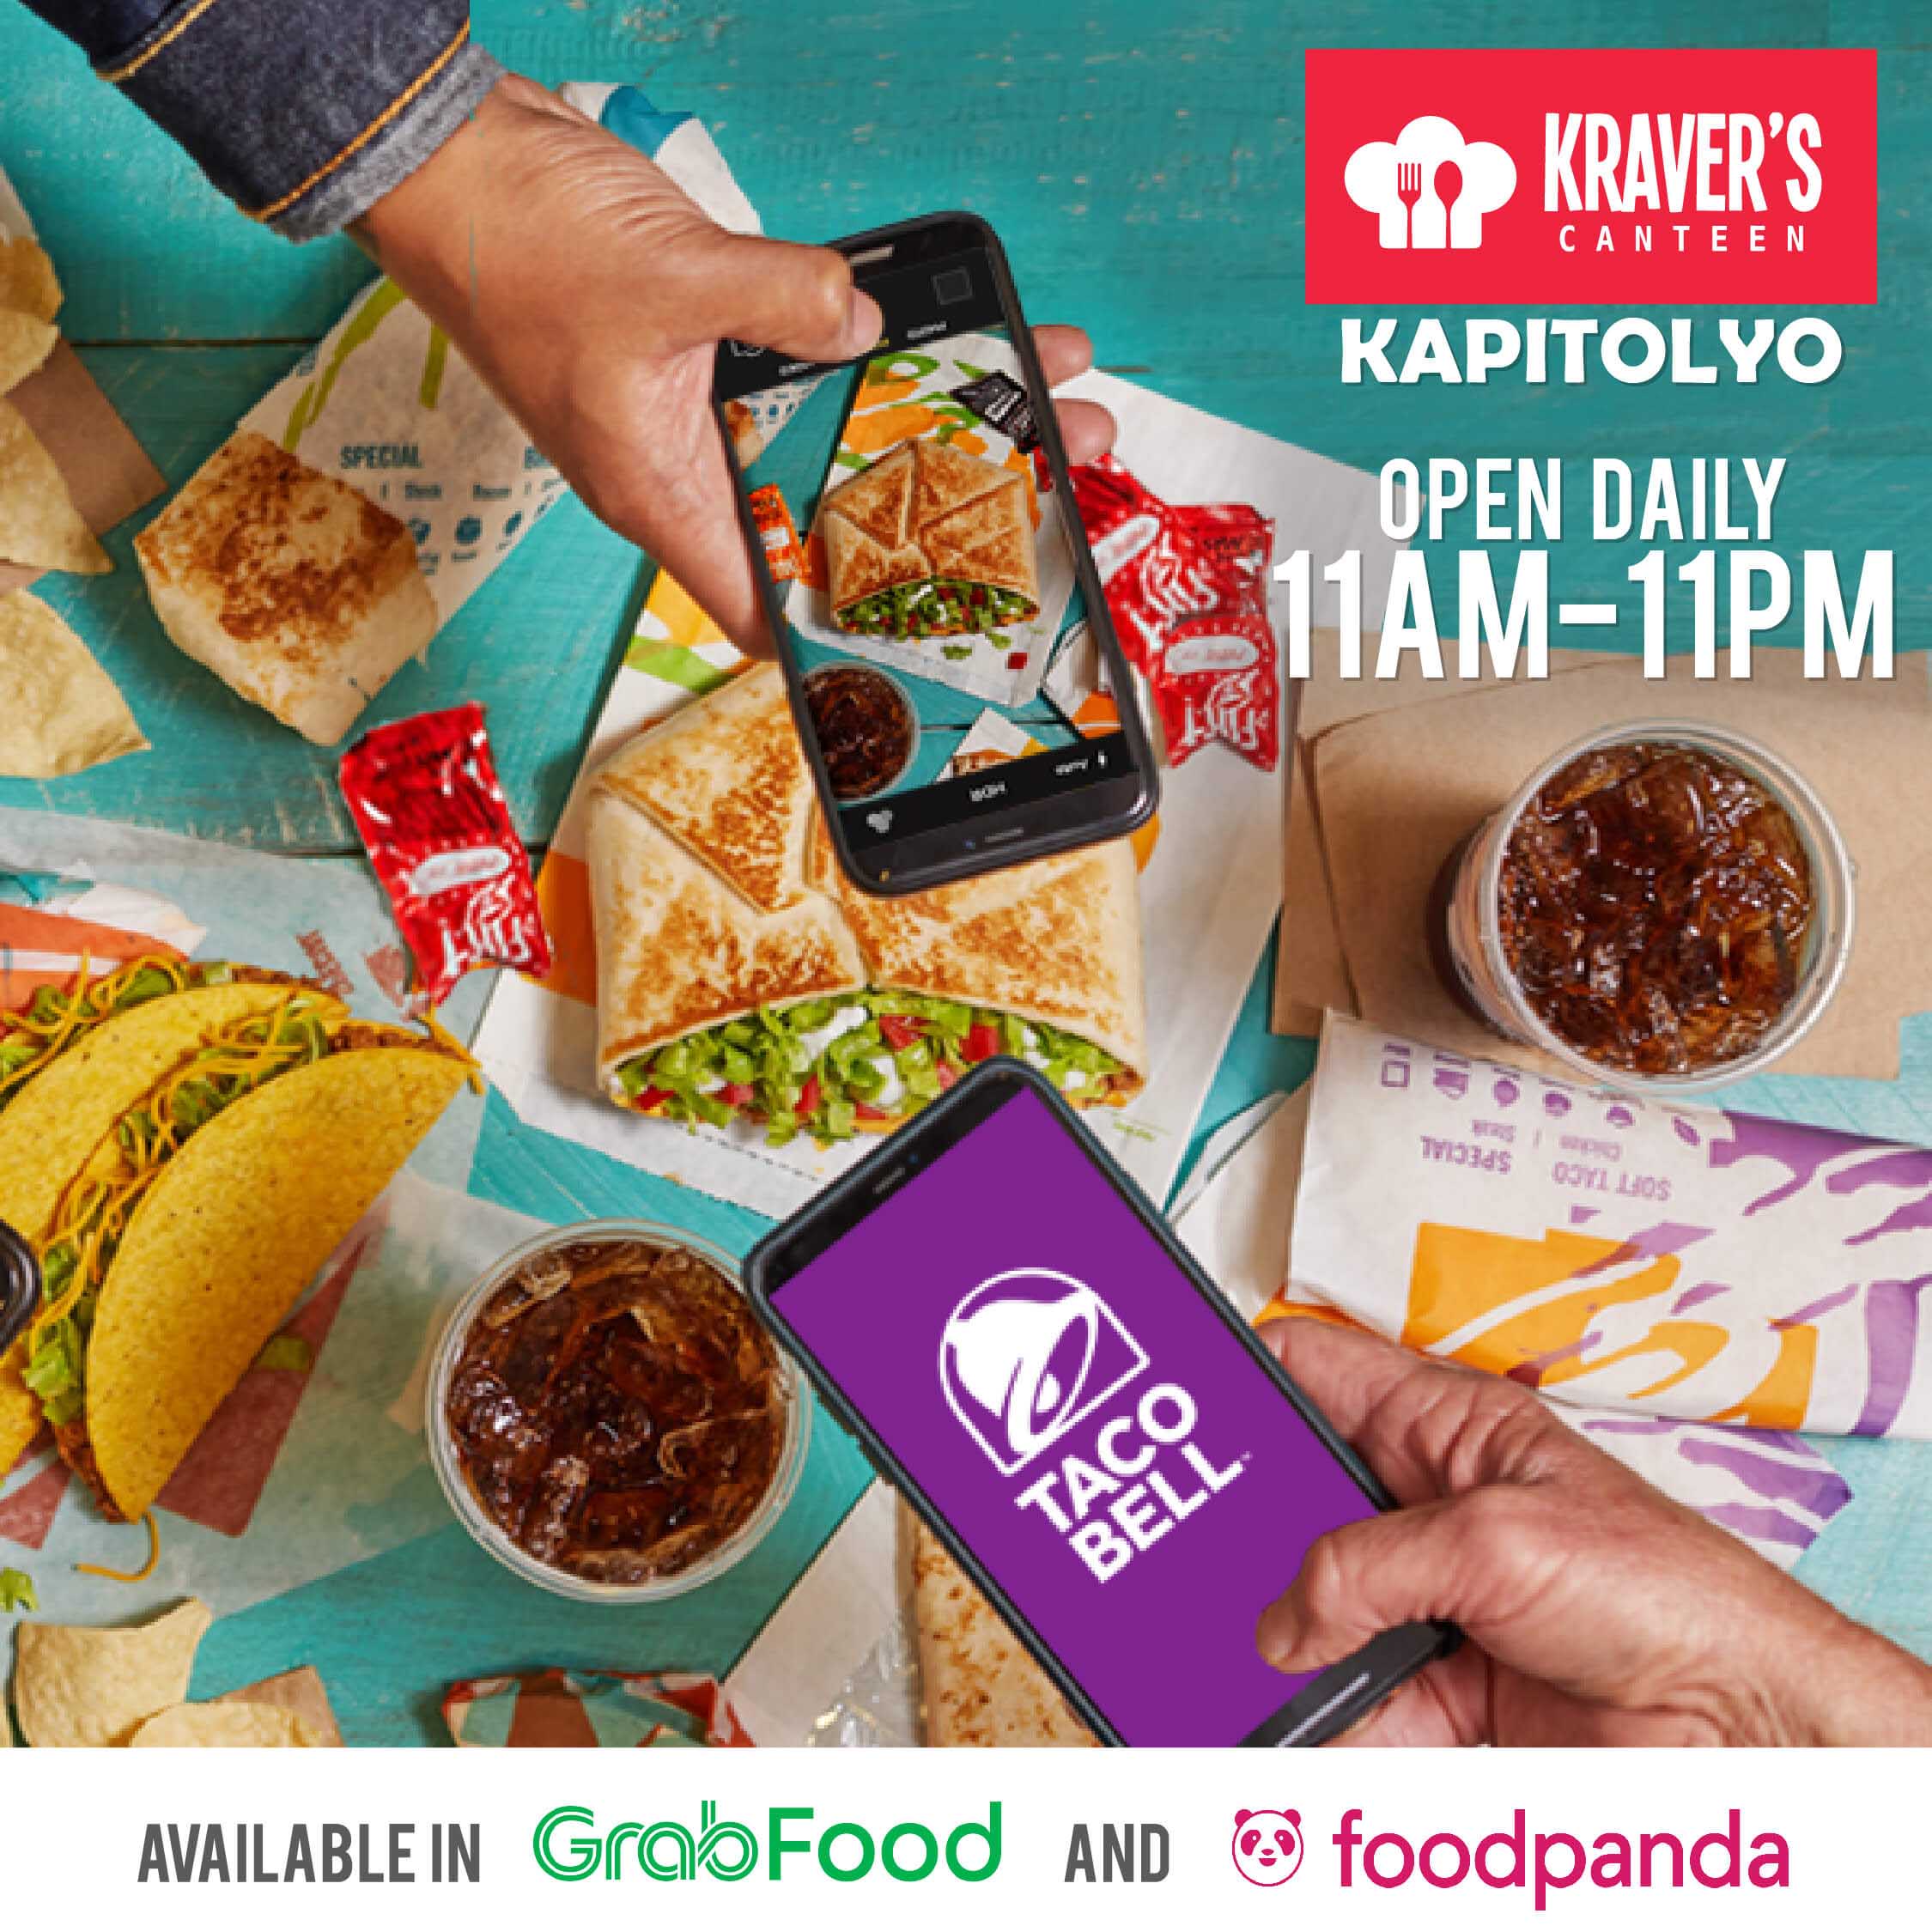 You make it all worth it to midnight: Taco Bell Kraver’s Canteen Kapitolyo Branch is extended until 11PM